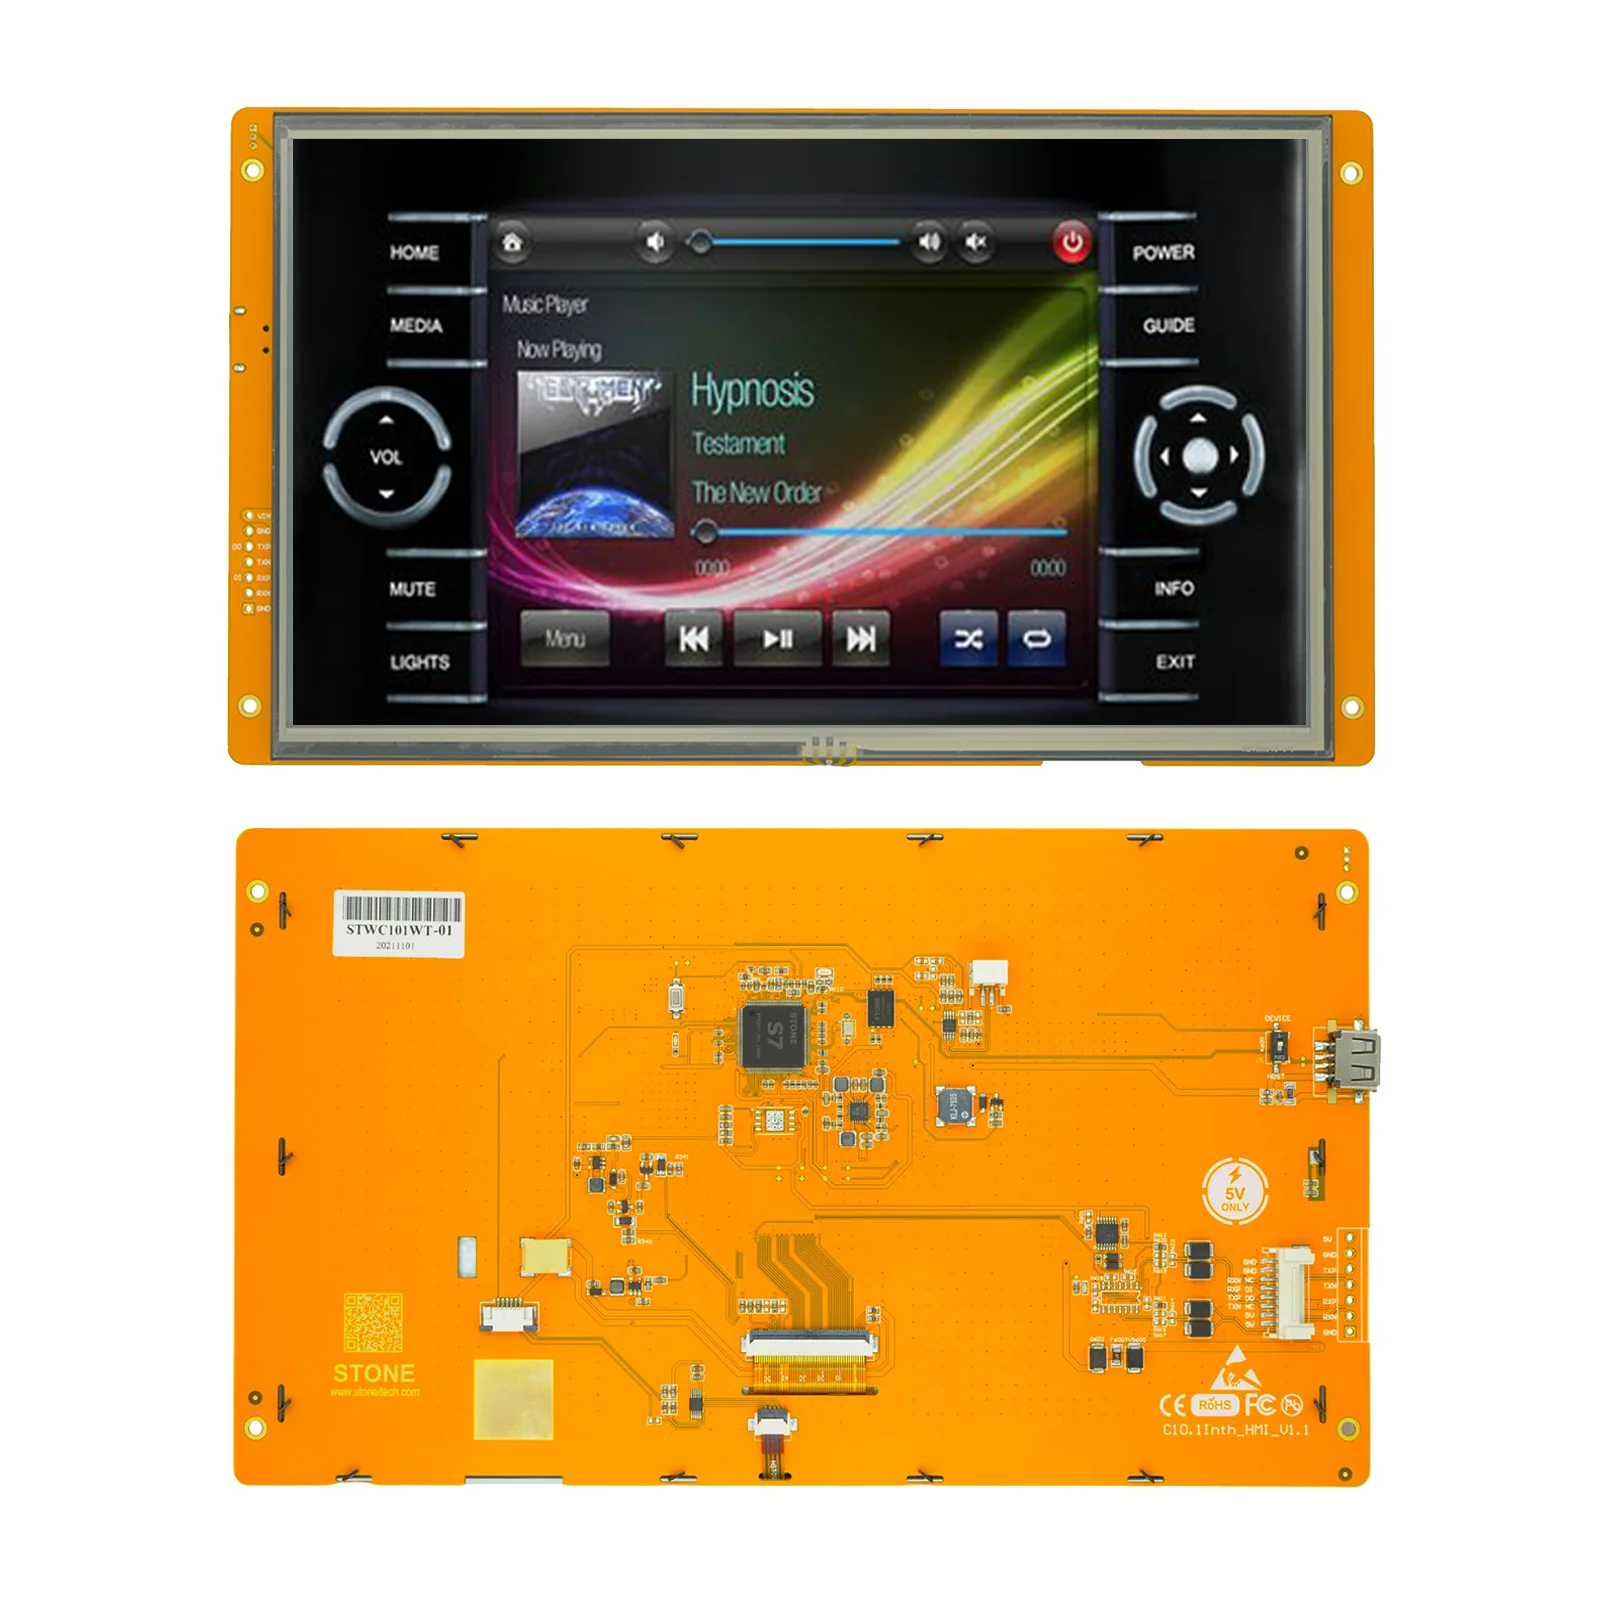 10.1 Inch Smart LCD Touchscreen Support for IOT Applications with 1024xRGBx600 Resolution + 128M Flash Memory